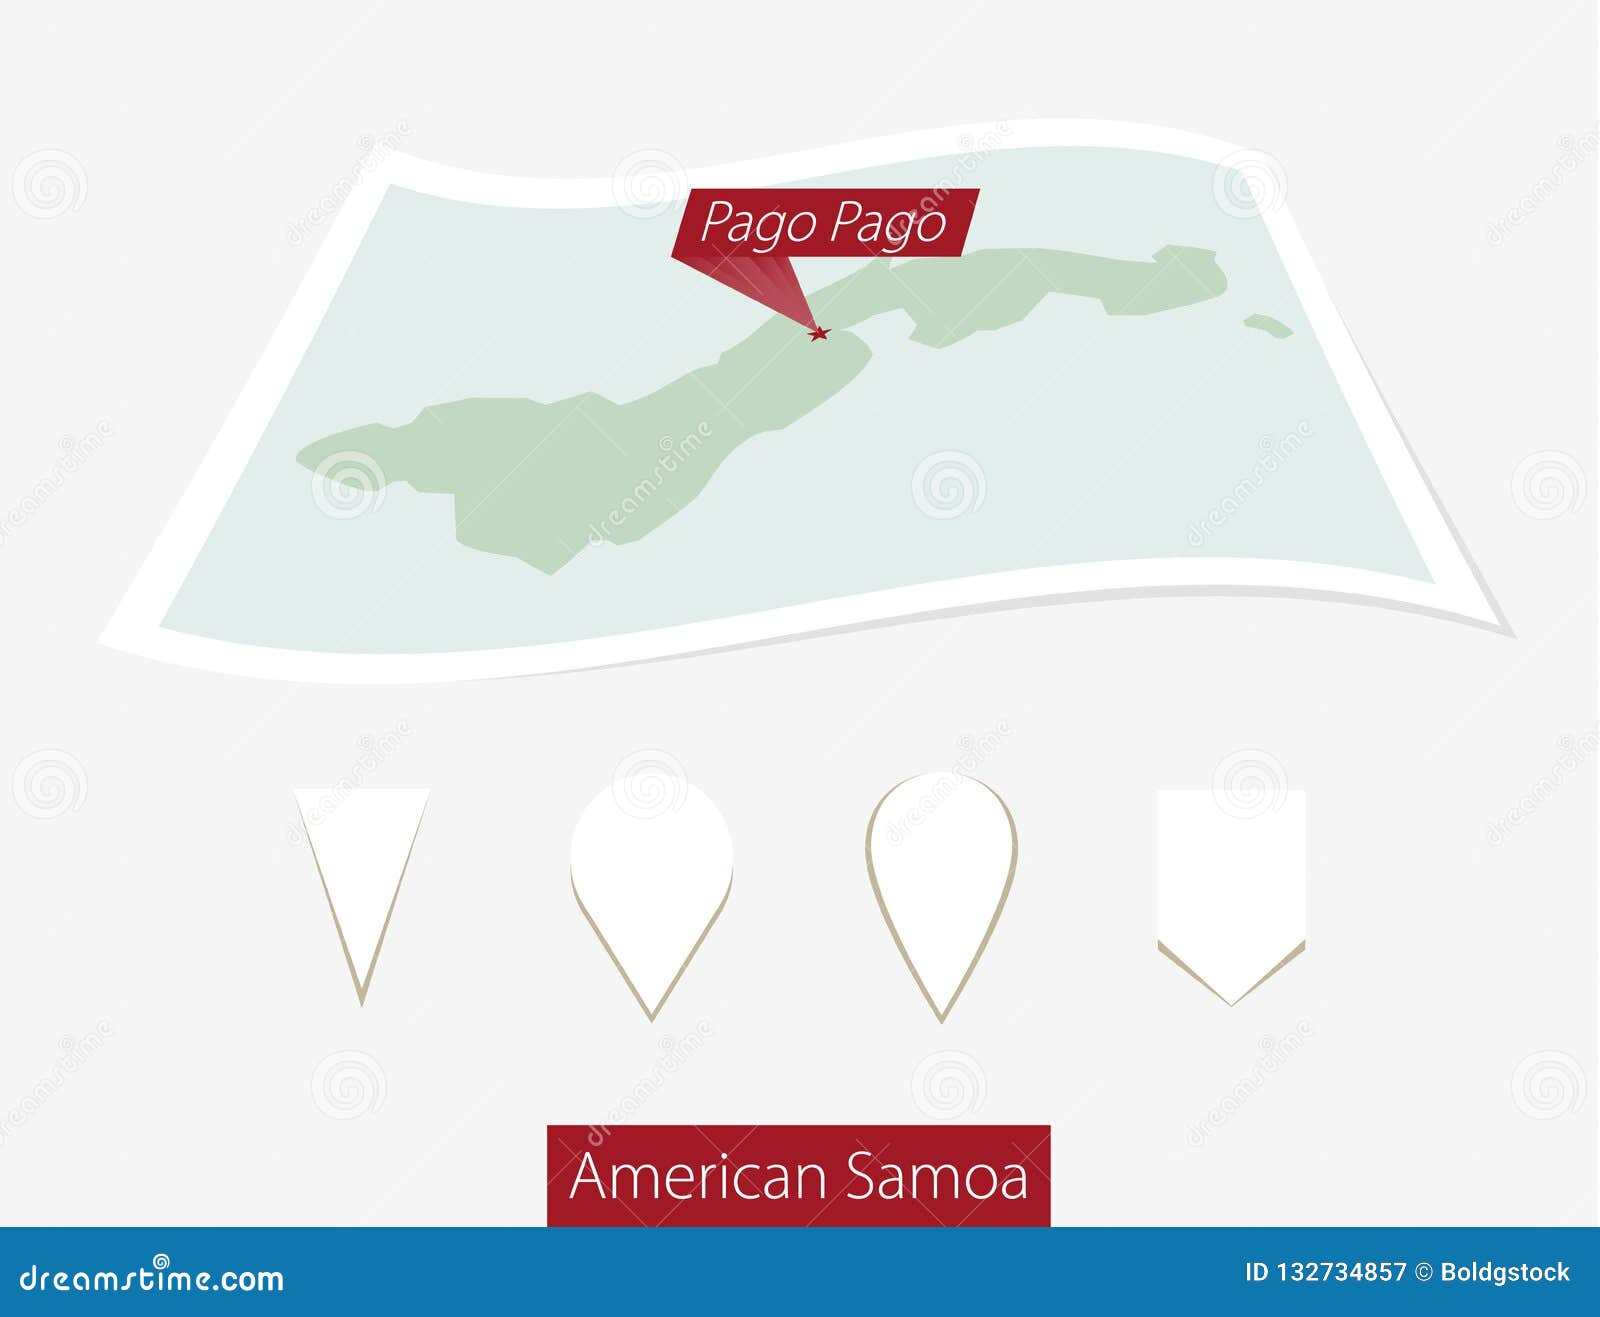 curved paper map of american samoa with capital pago pago on gray background. four different map pin set.